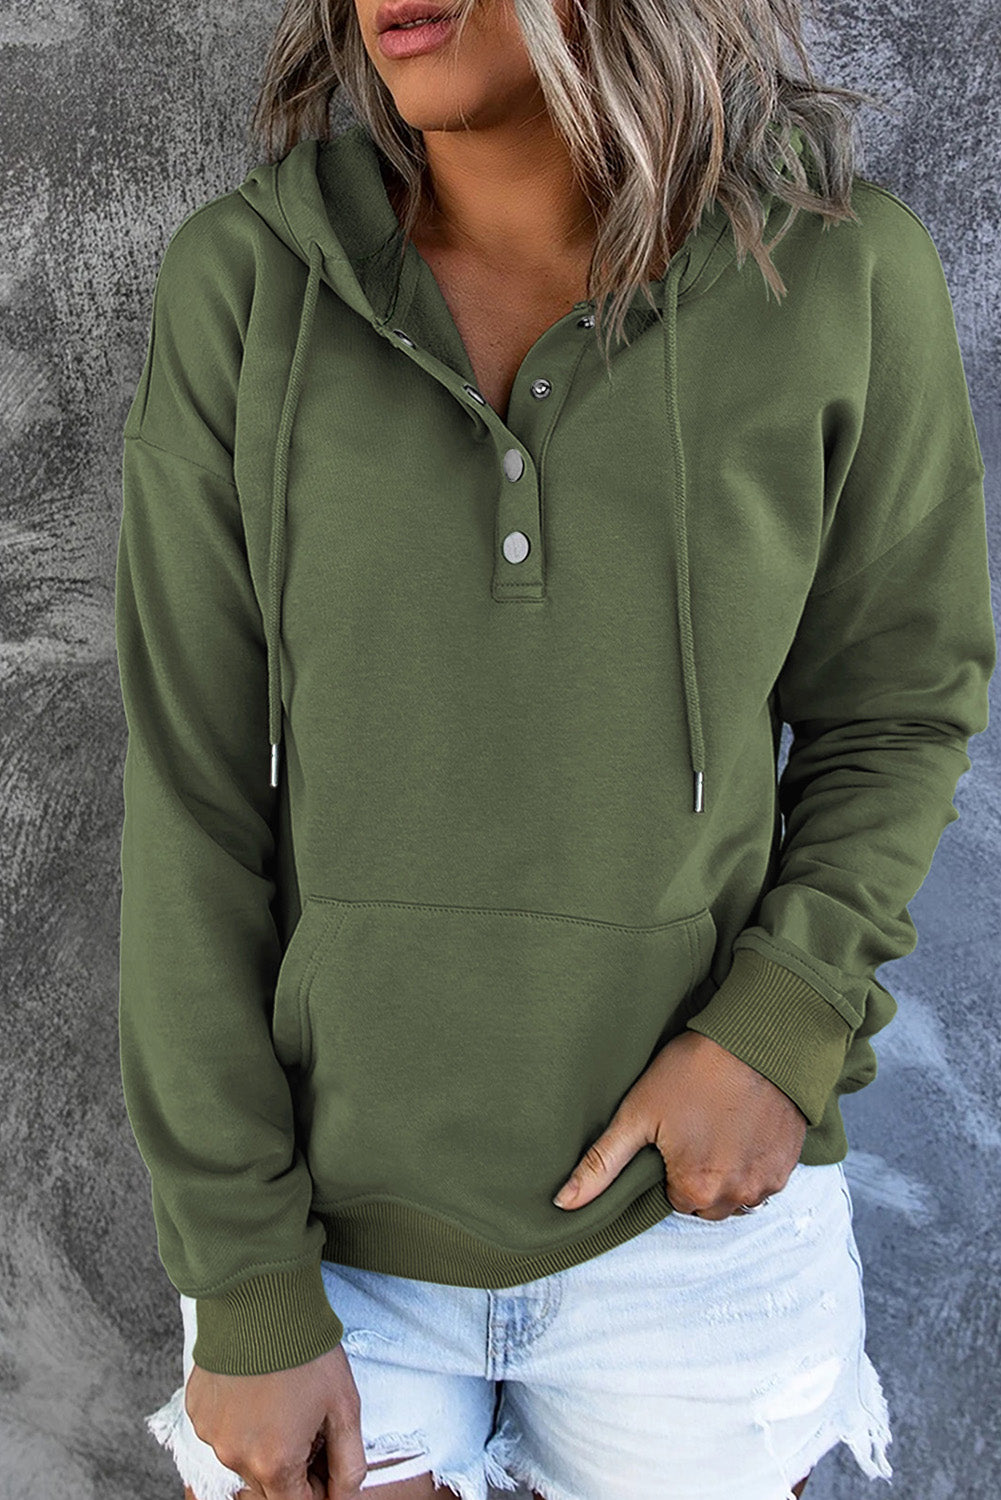 Dropped Shoulder Long Sleeve Hoodie with Pocket - Dark Green / S - Women’s Clothing & Accessories - Shirts & Tops - 4